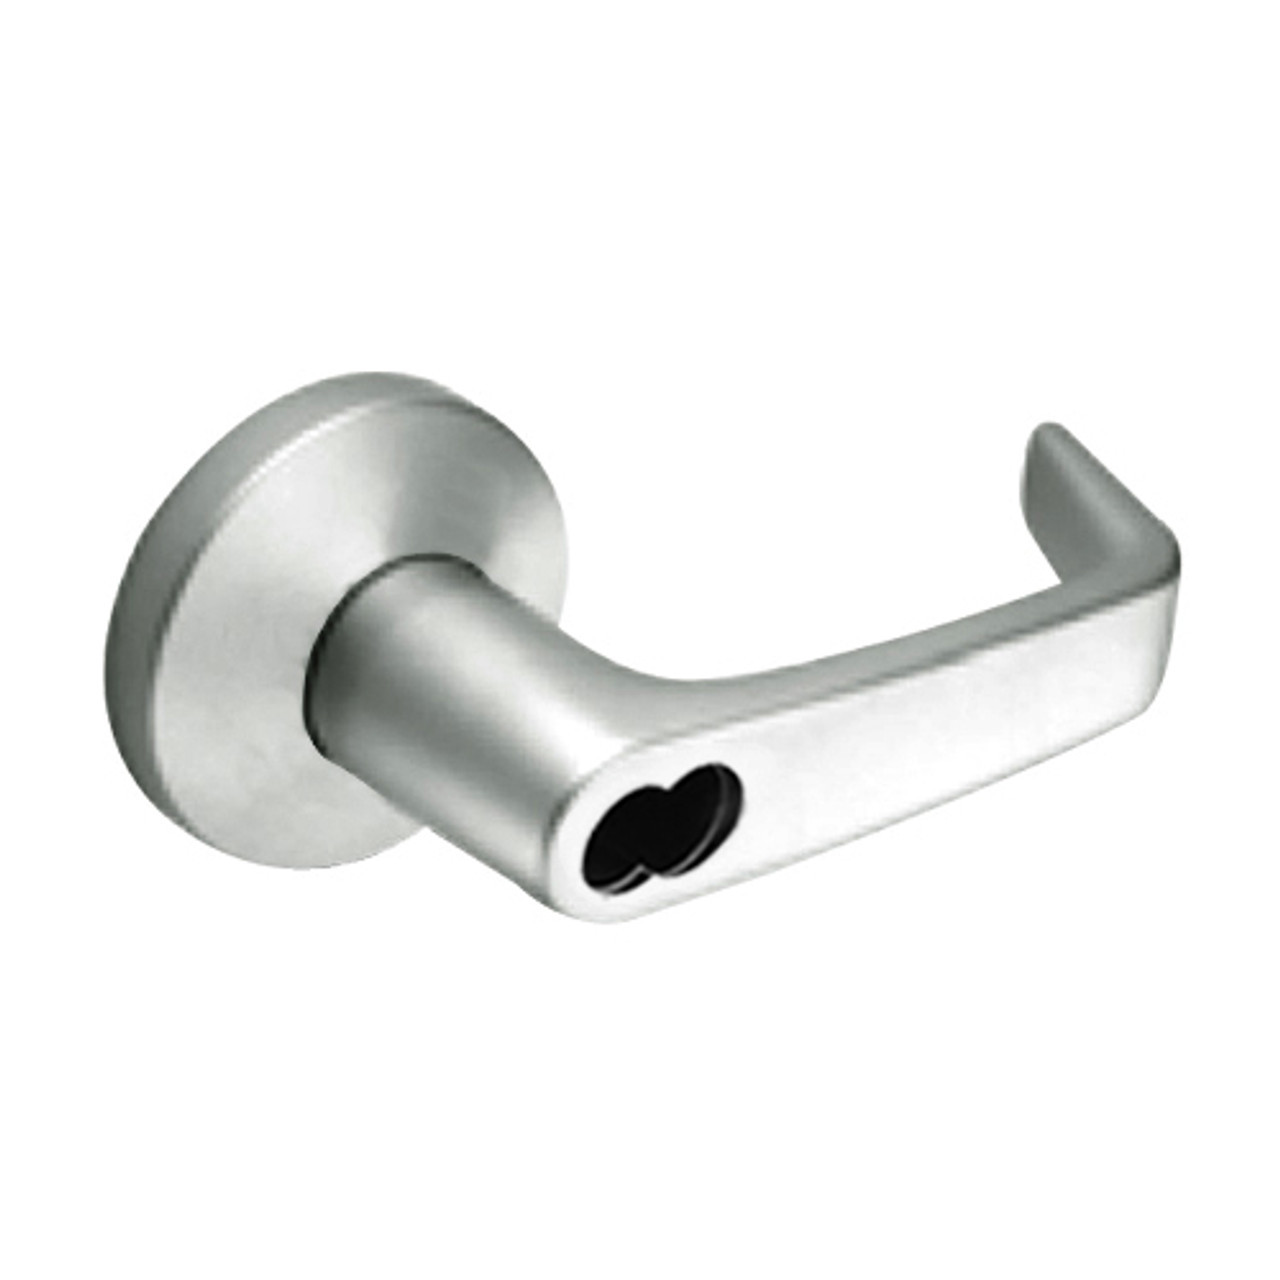 9K57A15KSTK619LM Best 9K Series Dormitory or Storeroom Cylindrical Lever Locks with Contour Angle with Return Lever Design Accept 7 Pin Best Core in Satin Nickel